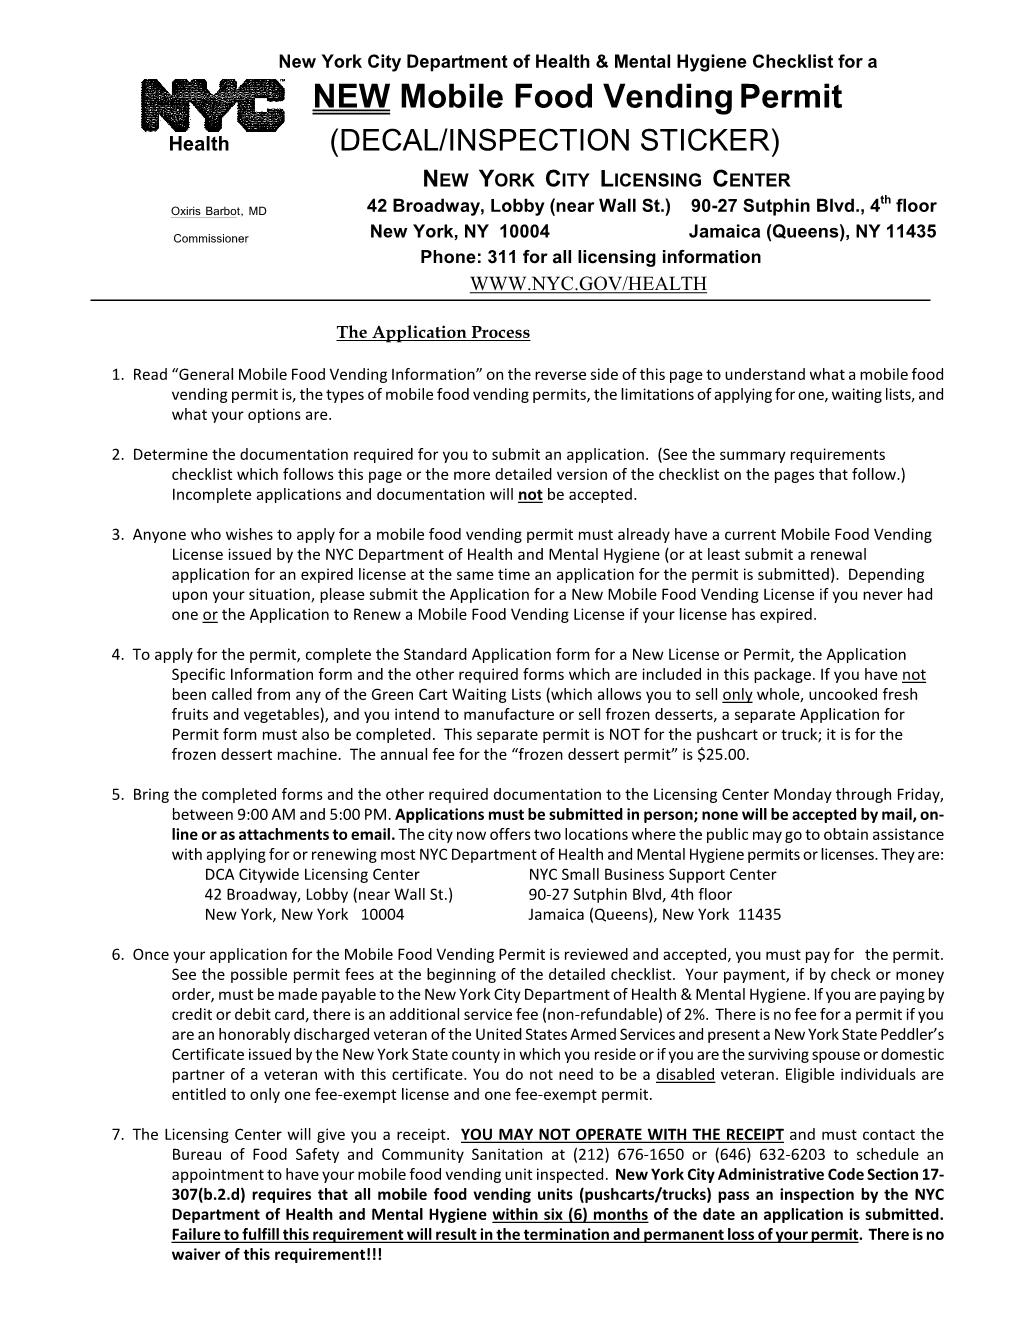 New York City Department of Health Checklist for A